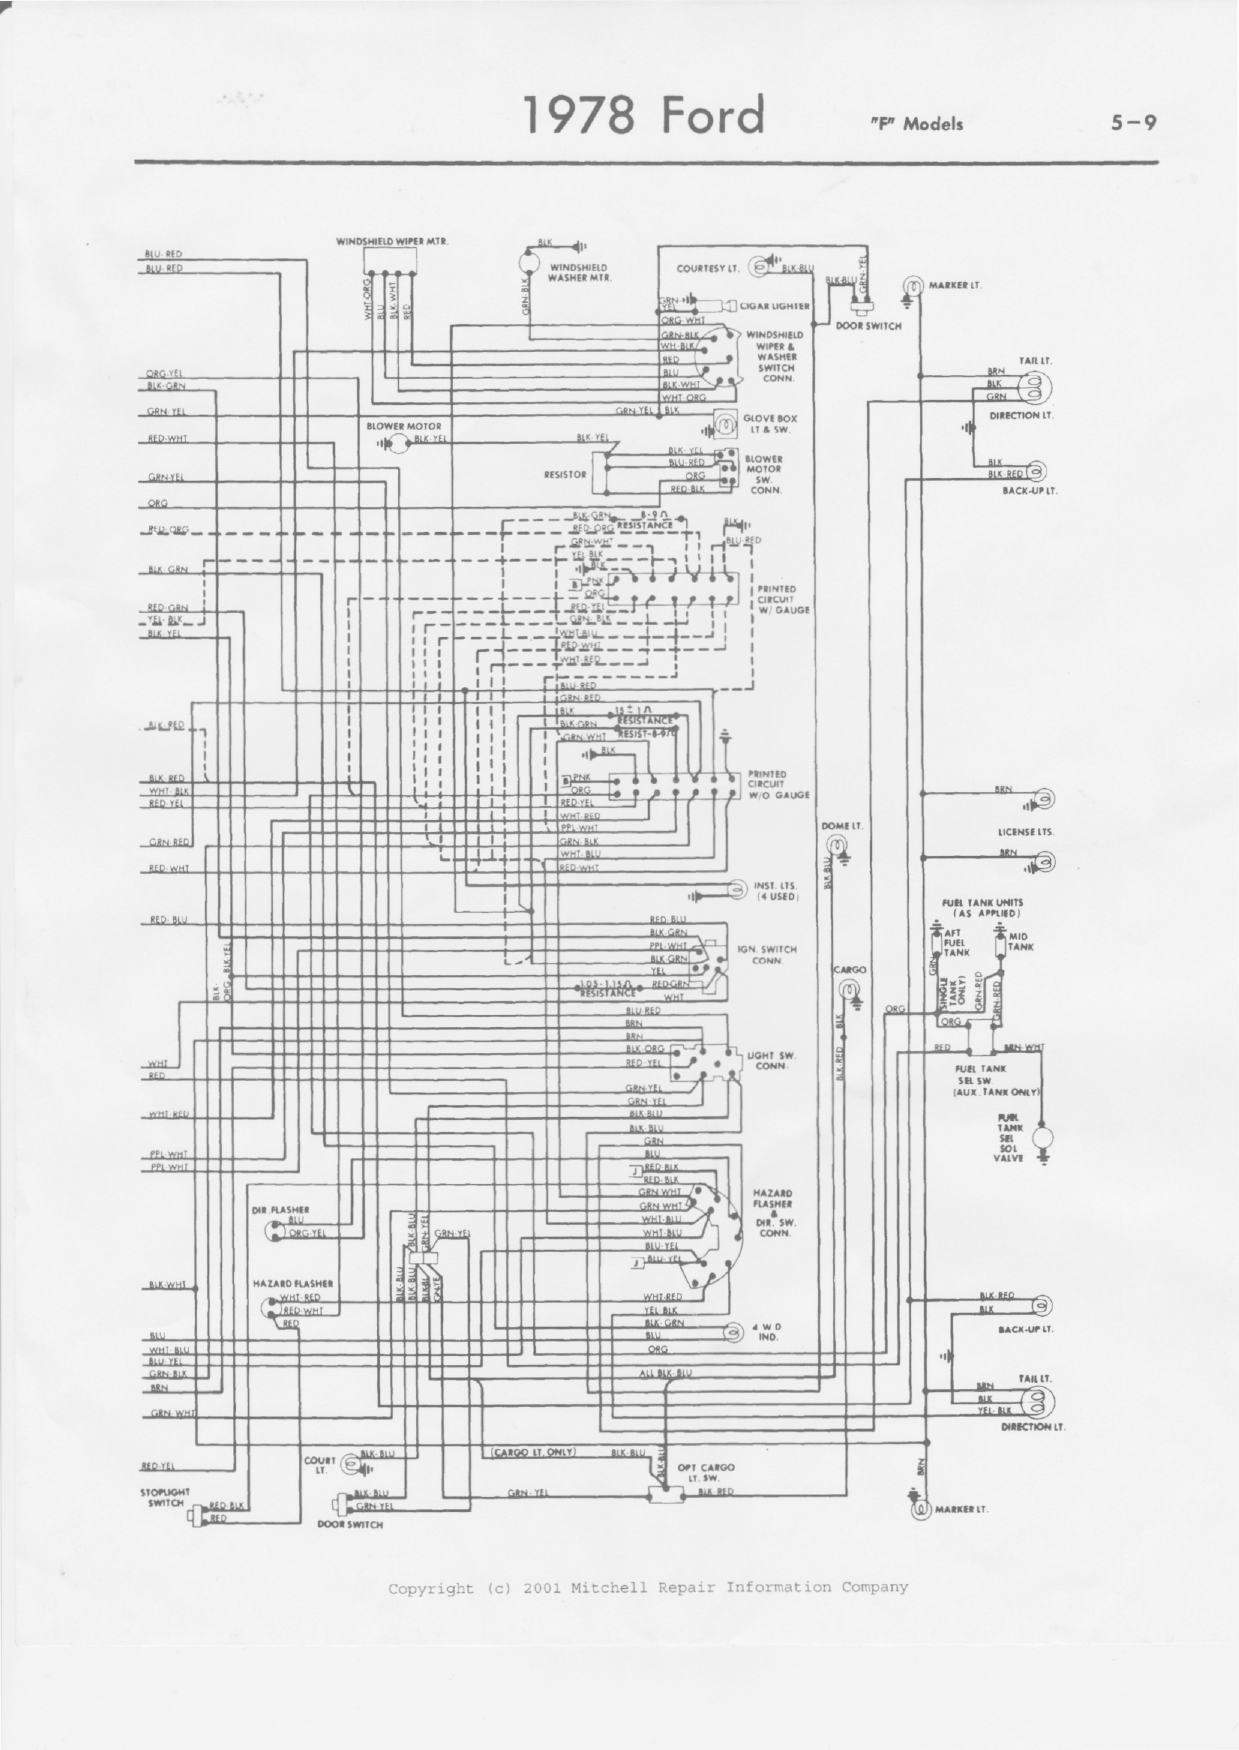 Wiring Diagram For 1978 Ford F250 - Complete Wiring Schemas